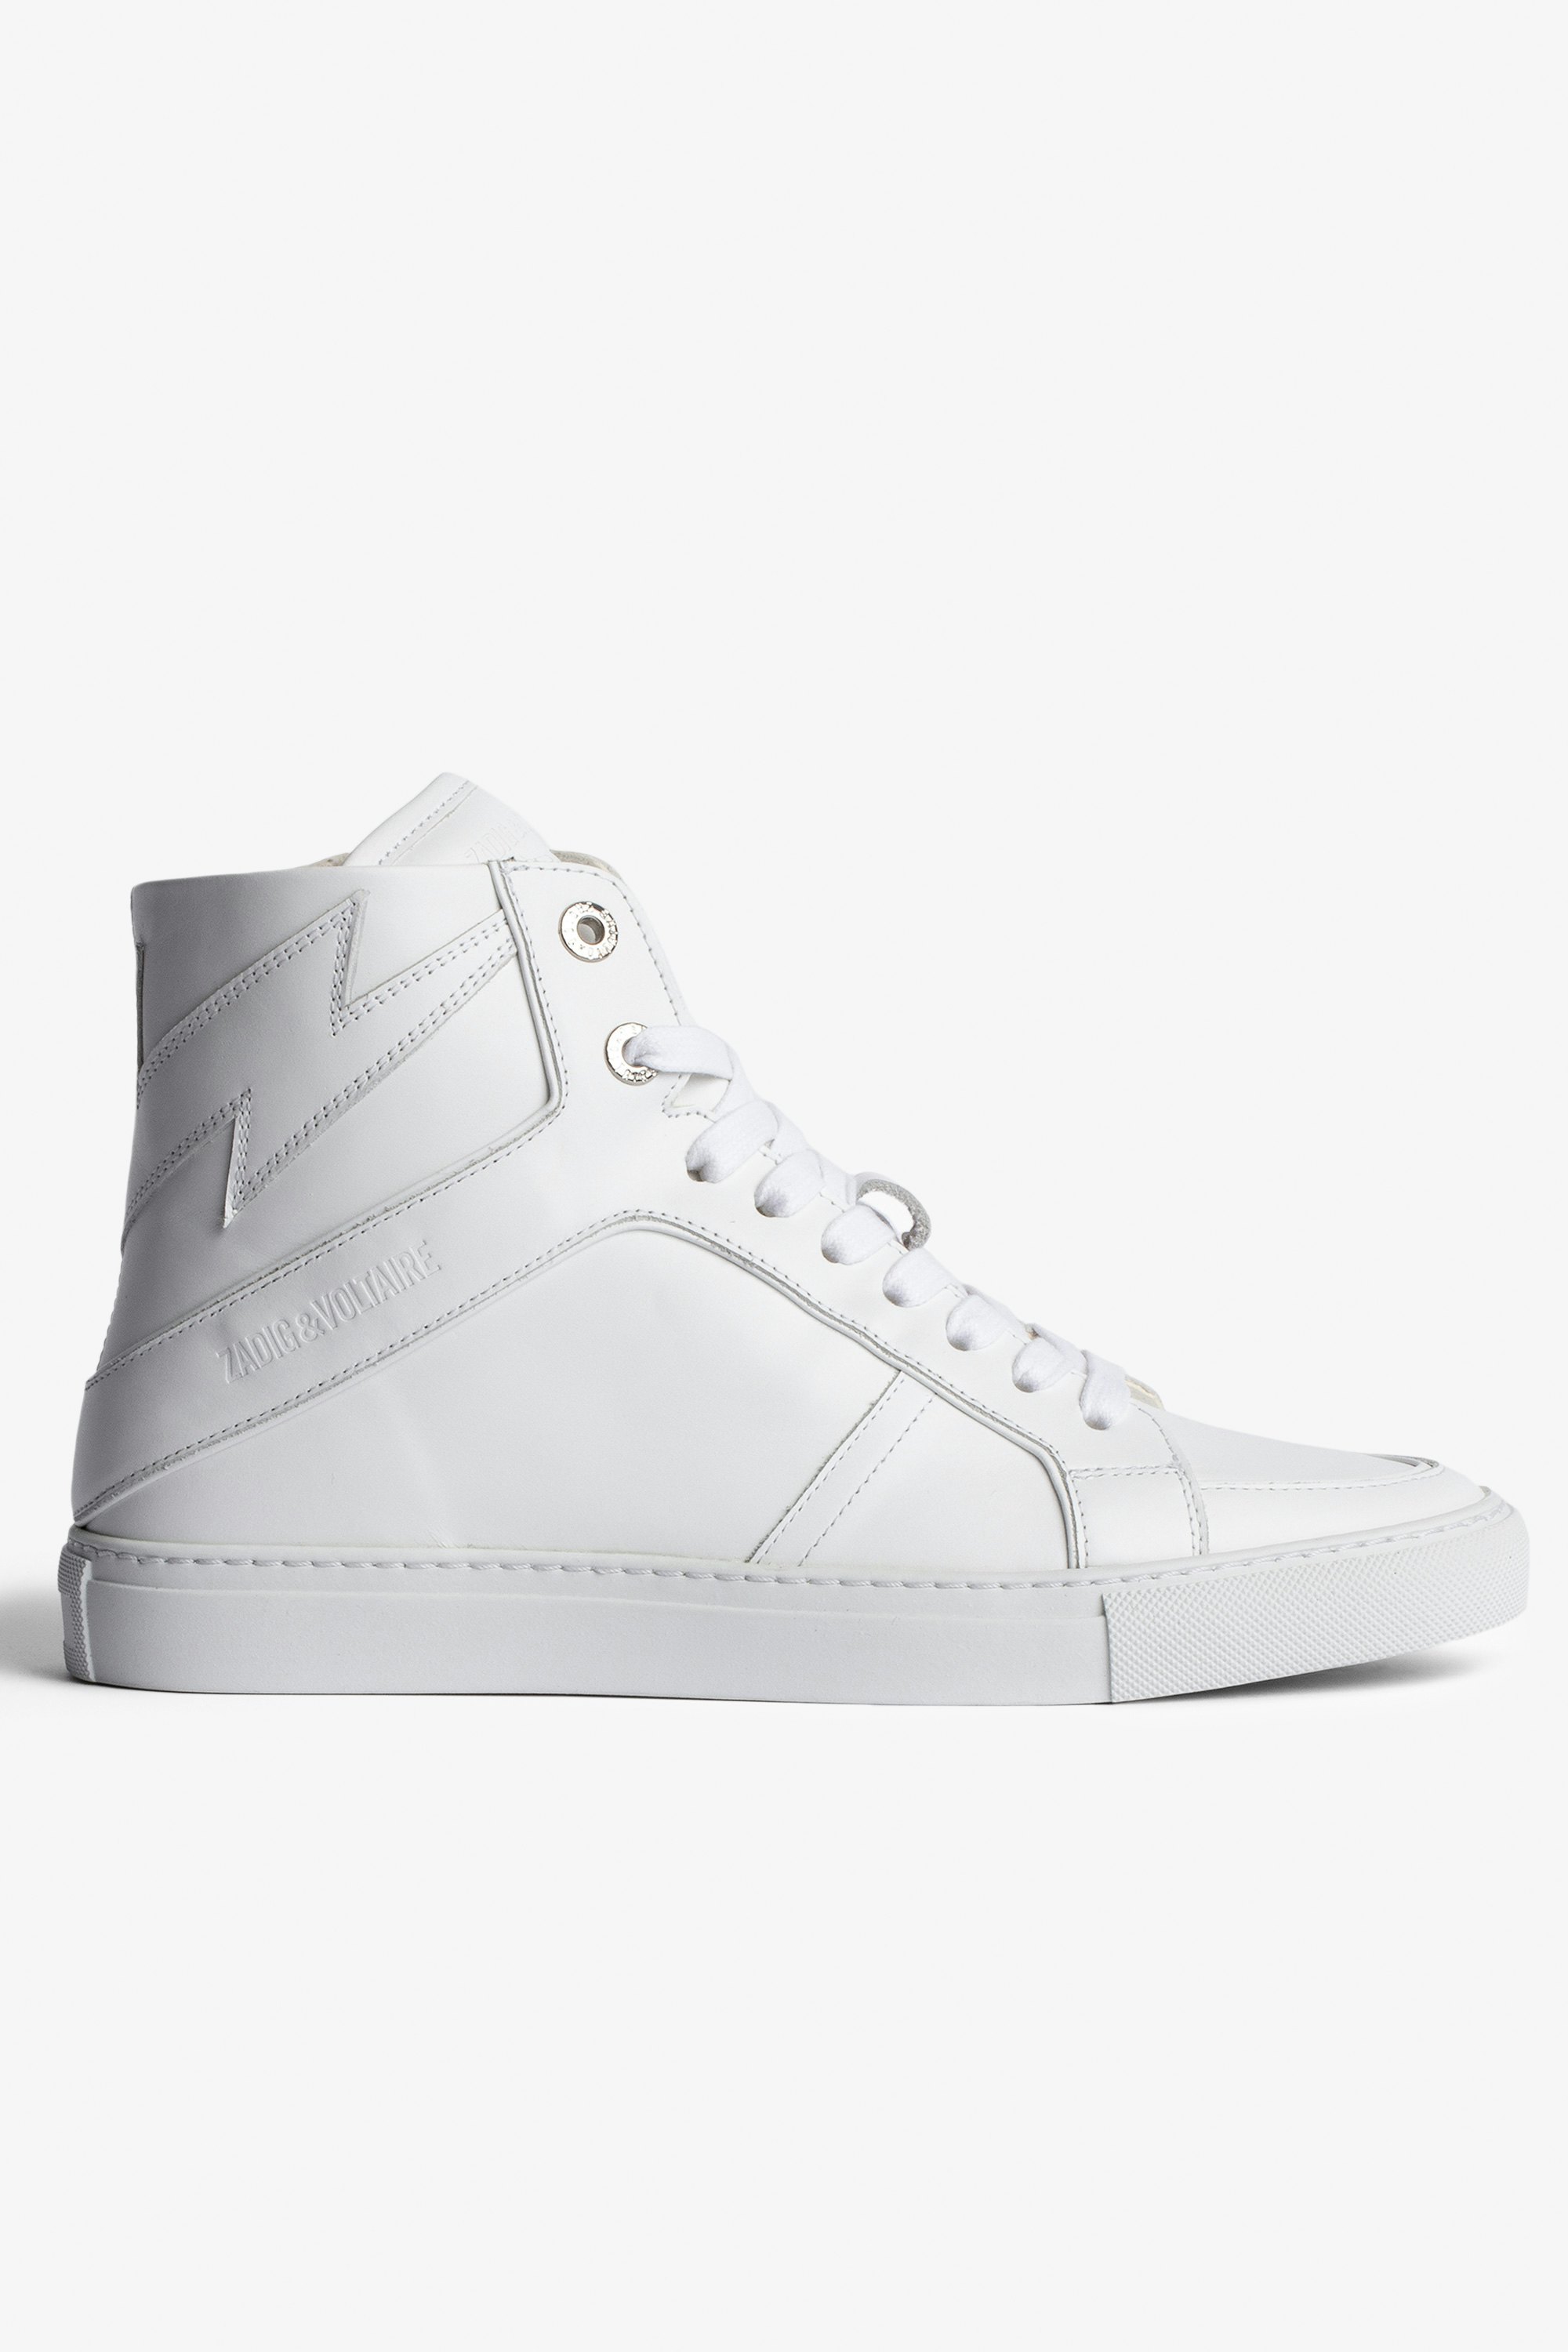 Sneakers Montantes Cuir ZV1747 High Flash Baskets blanches femme montantes en cuir.